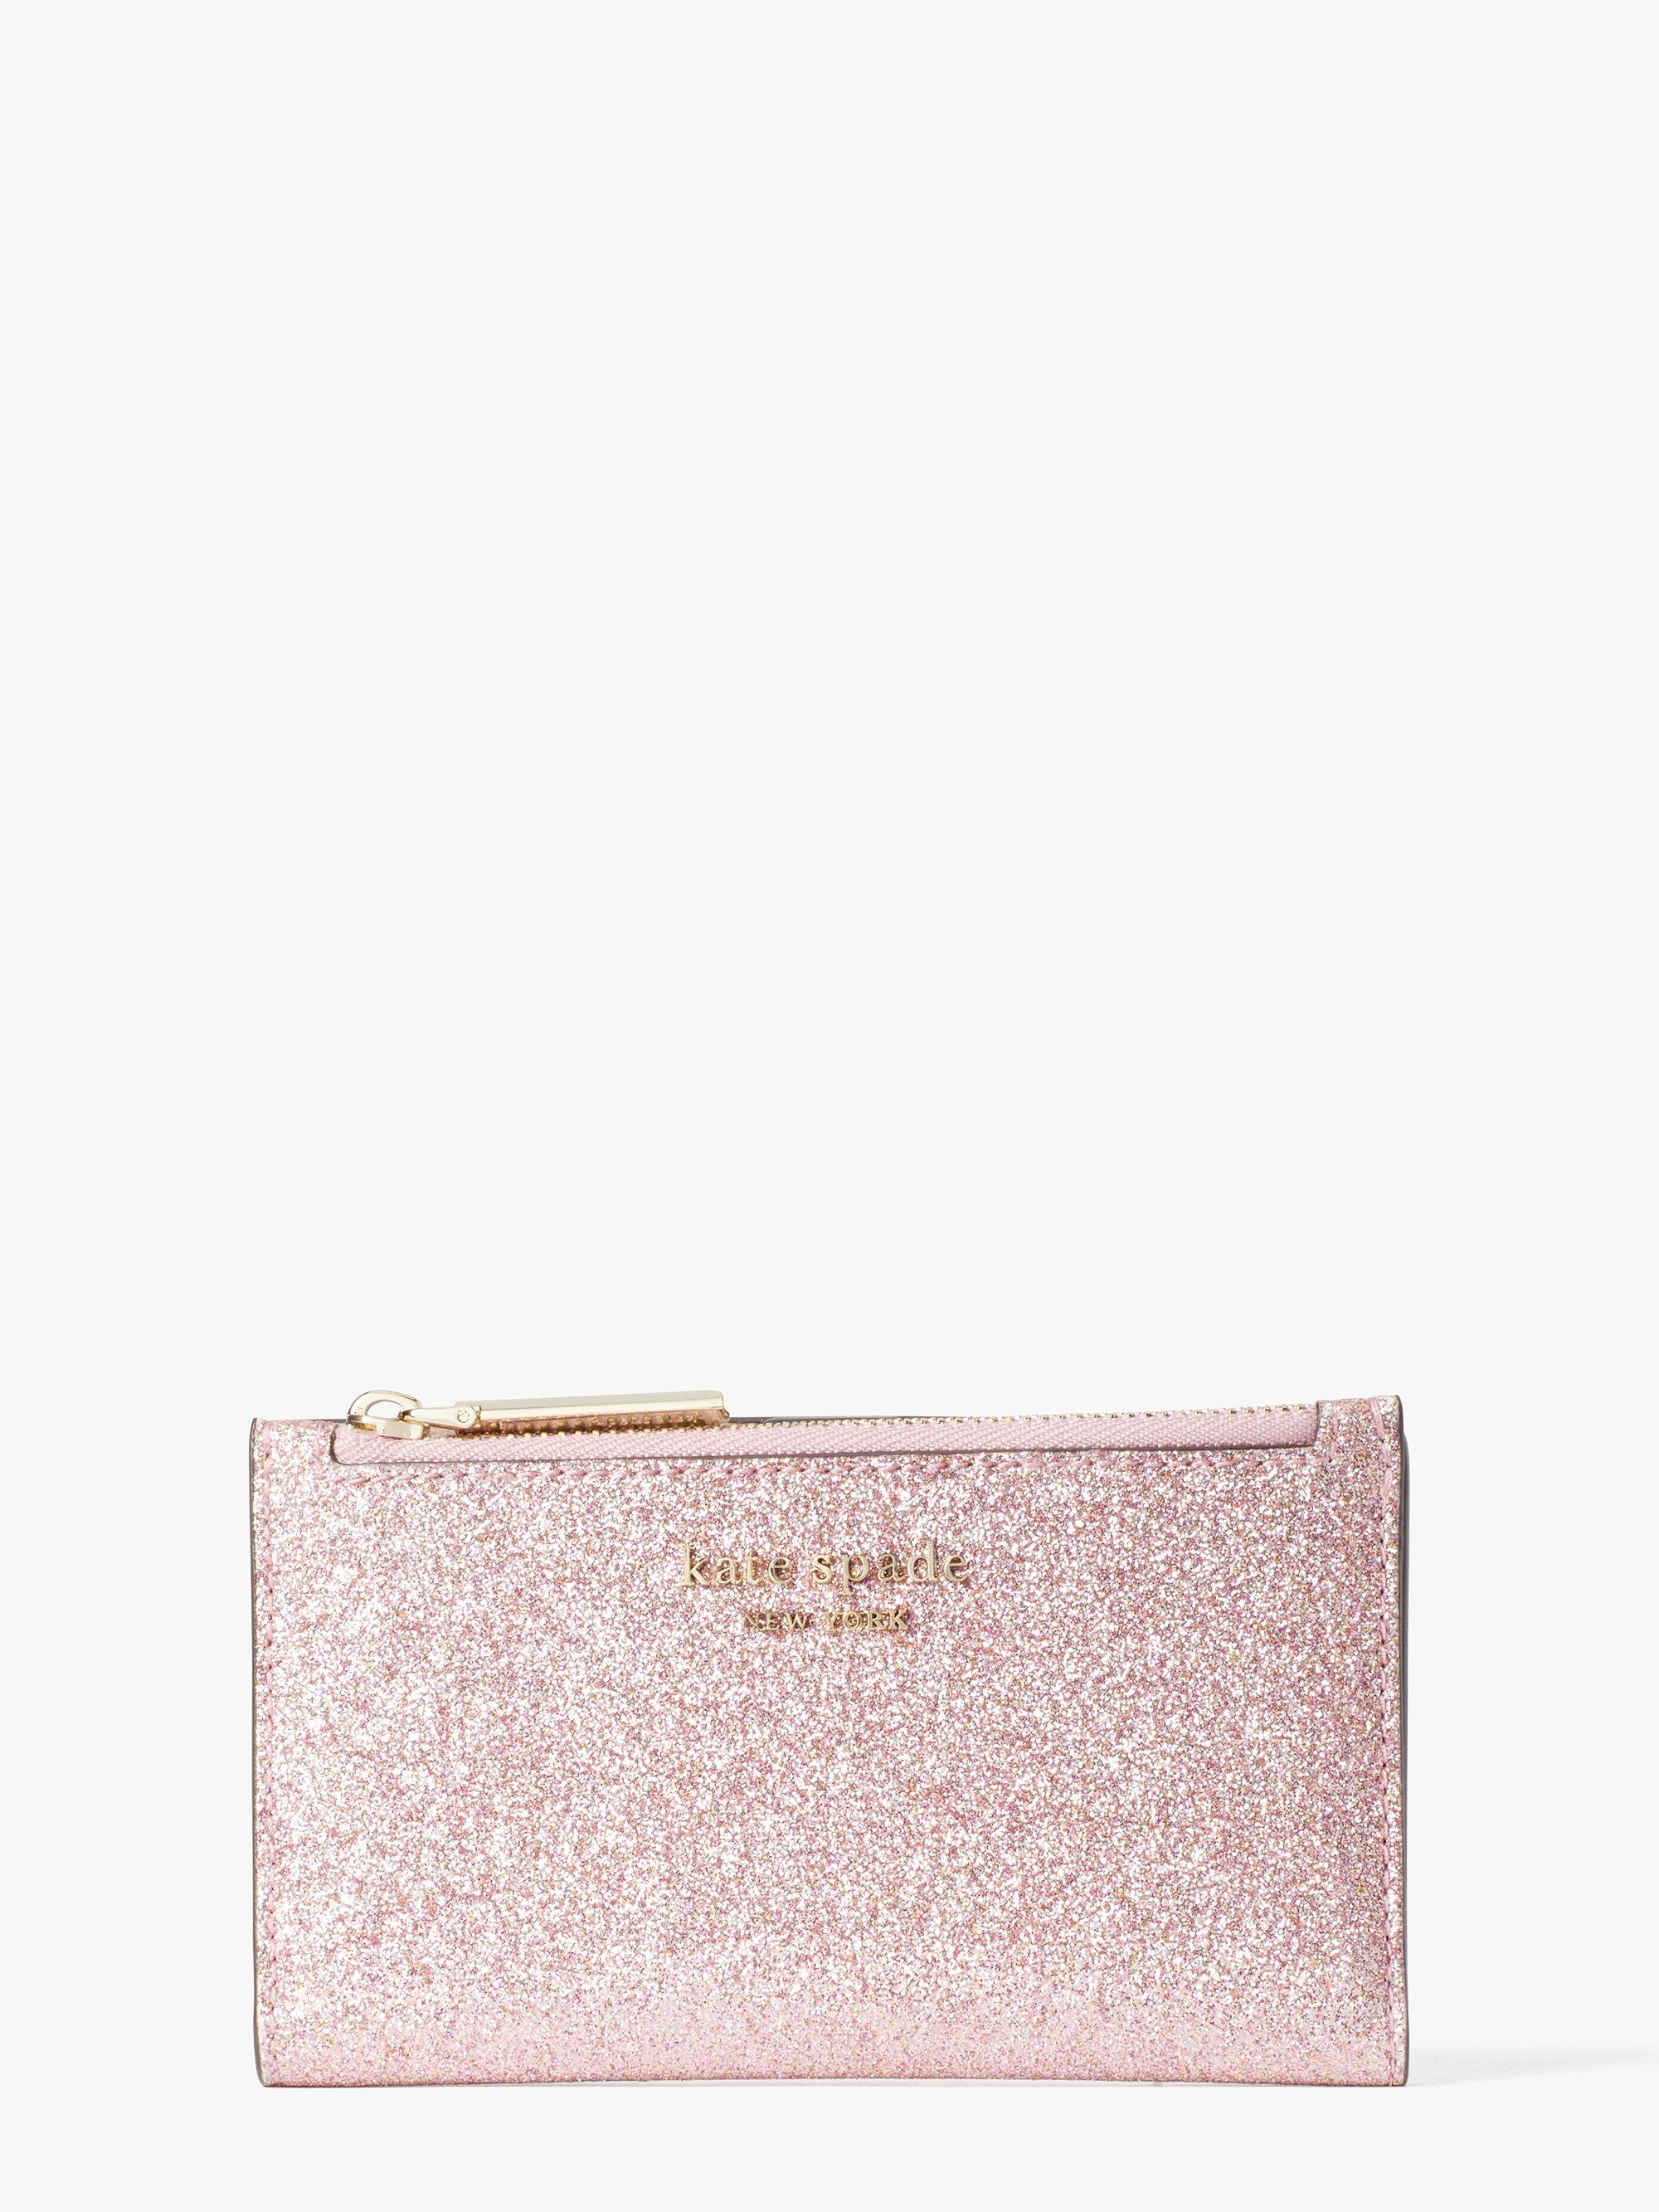 Kate Spade Leather Spencer Glitter Small Slim Bifold Wallet in 